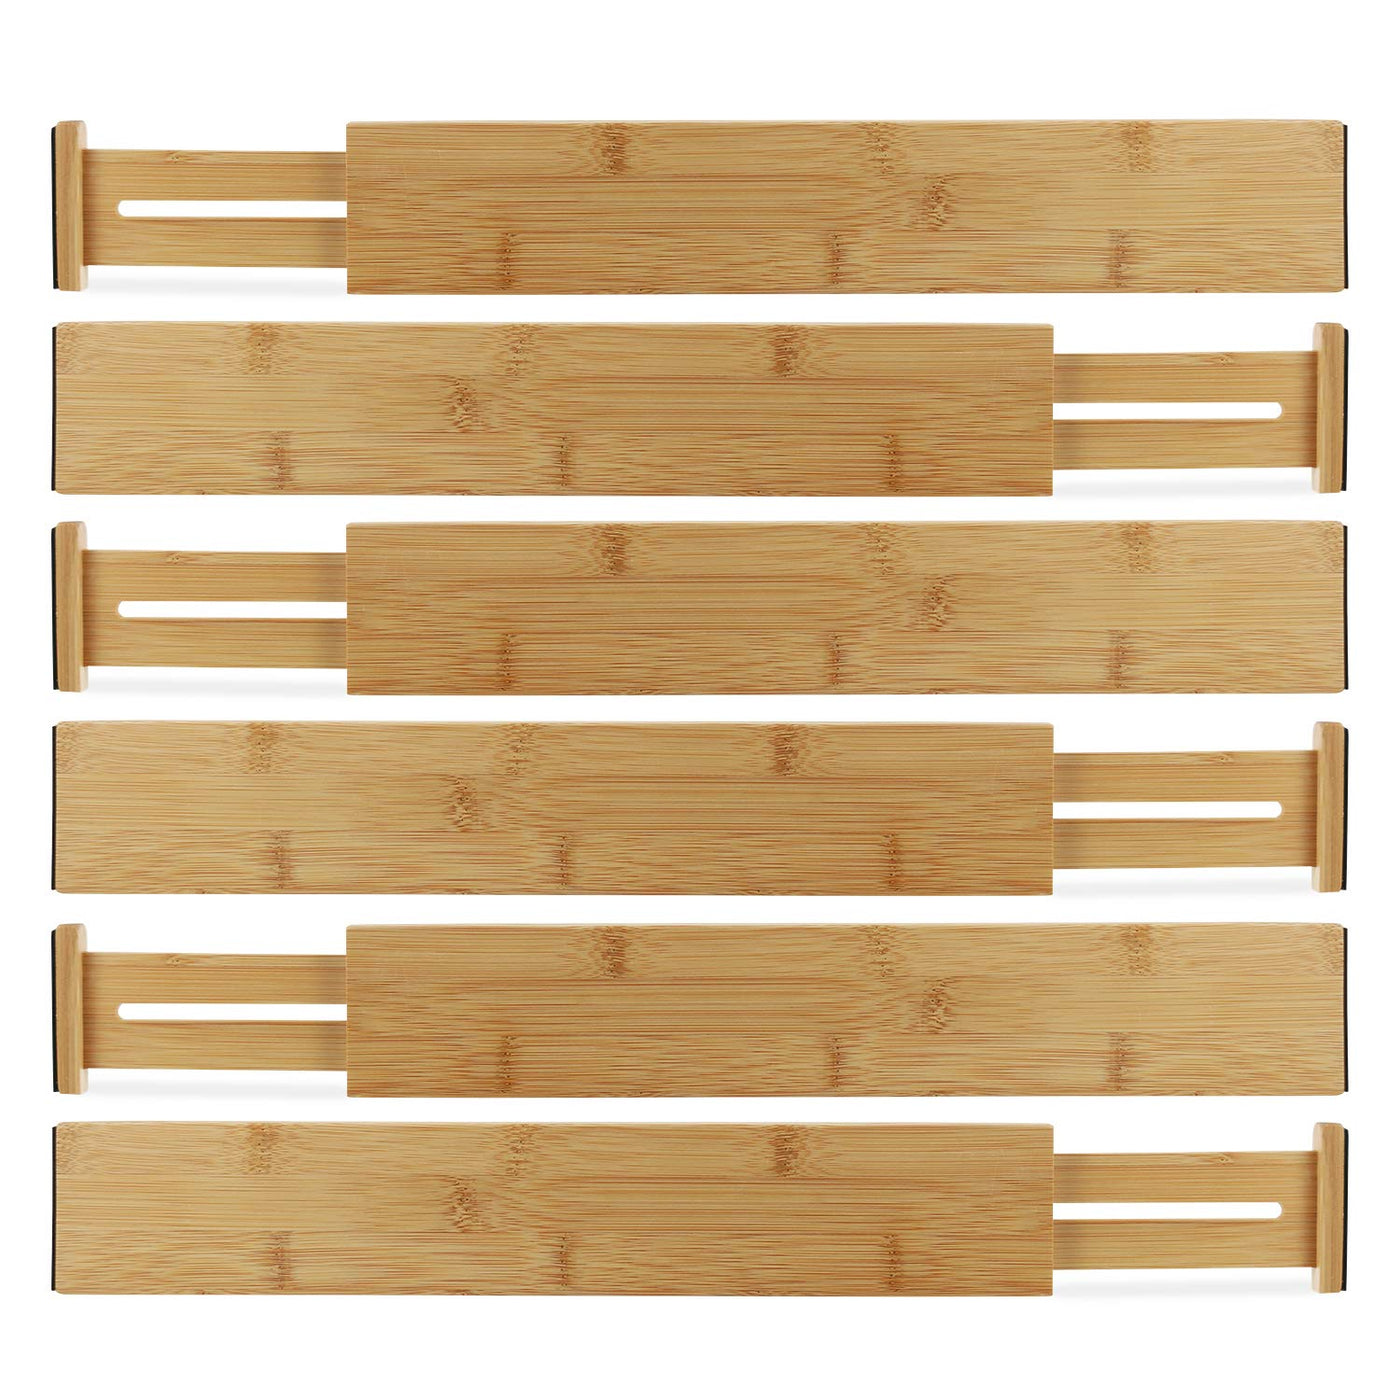 Drawer Dividers Bamboo Kitchen Organizers Set of 6 - Spring Loaded